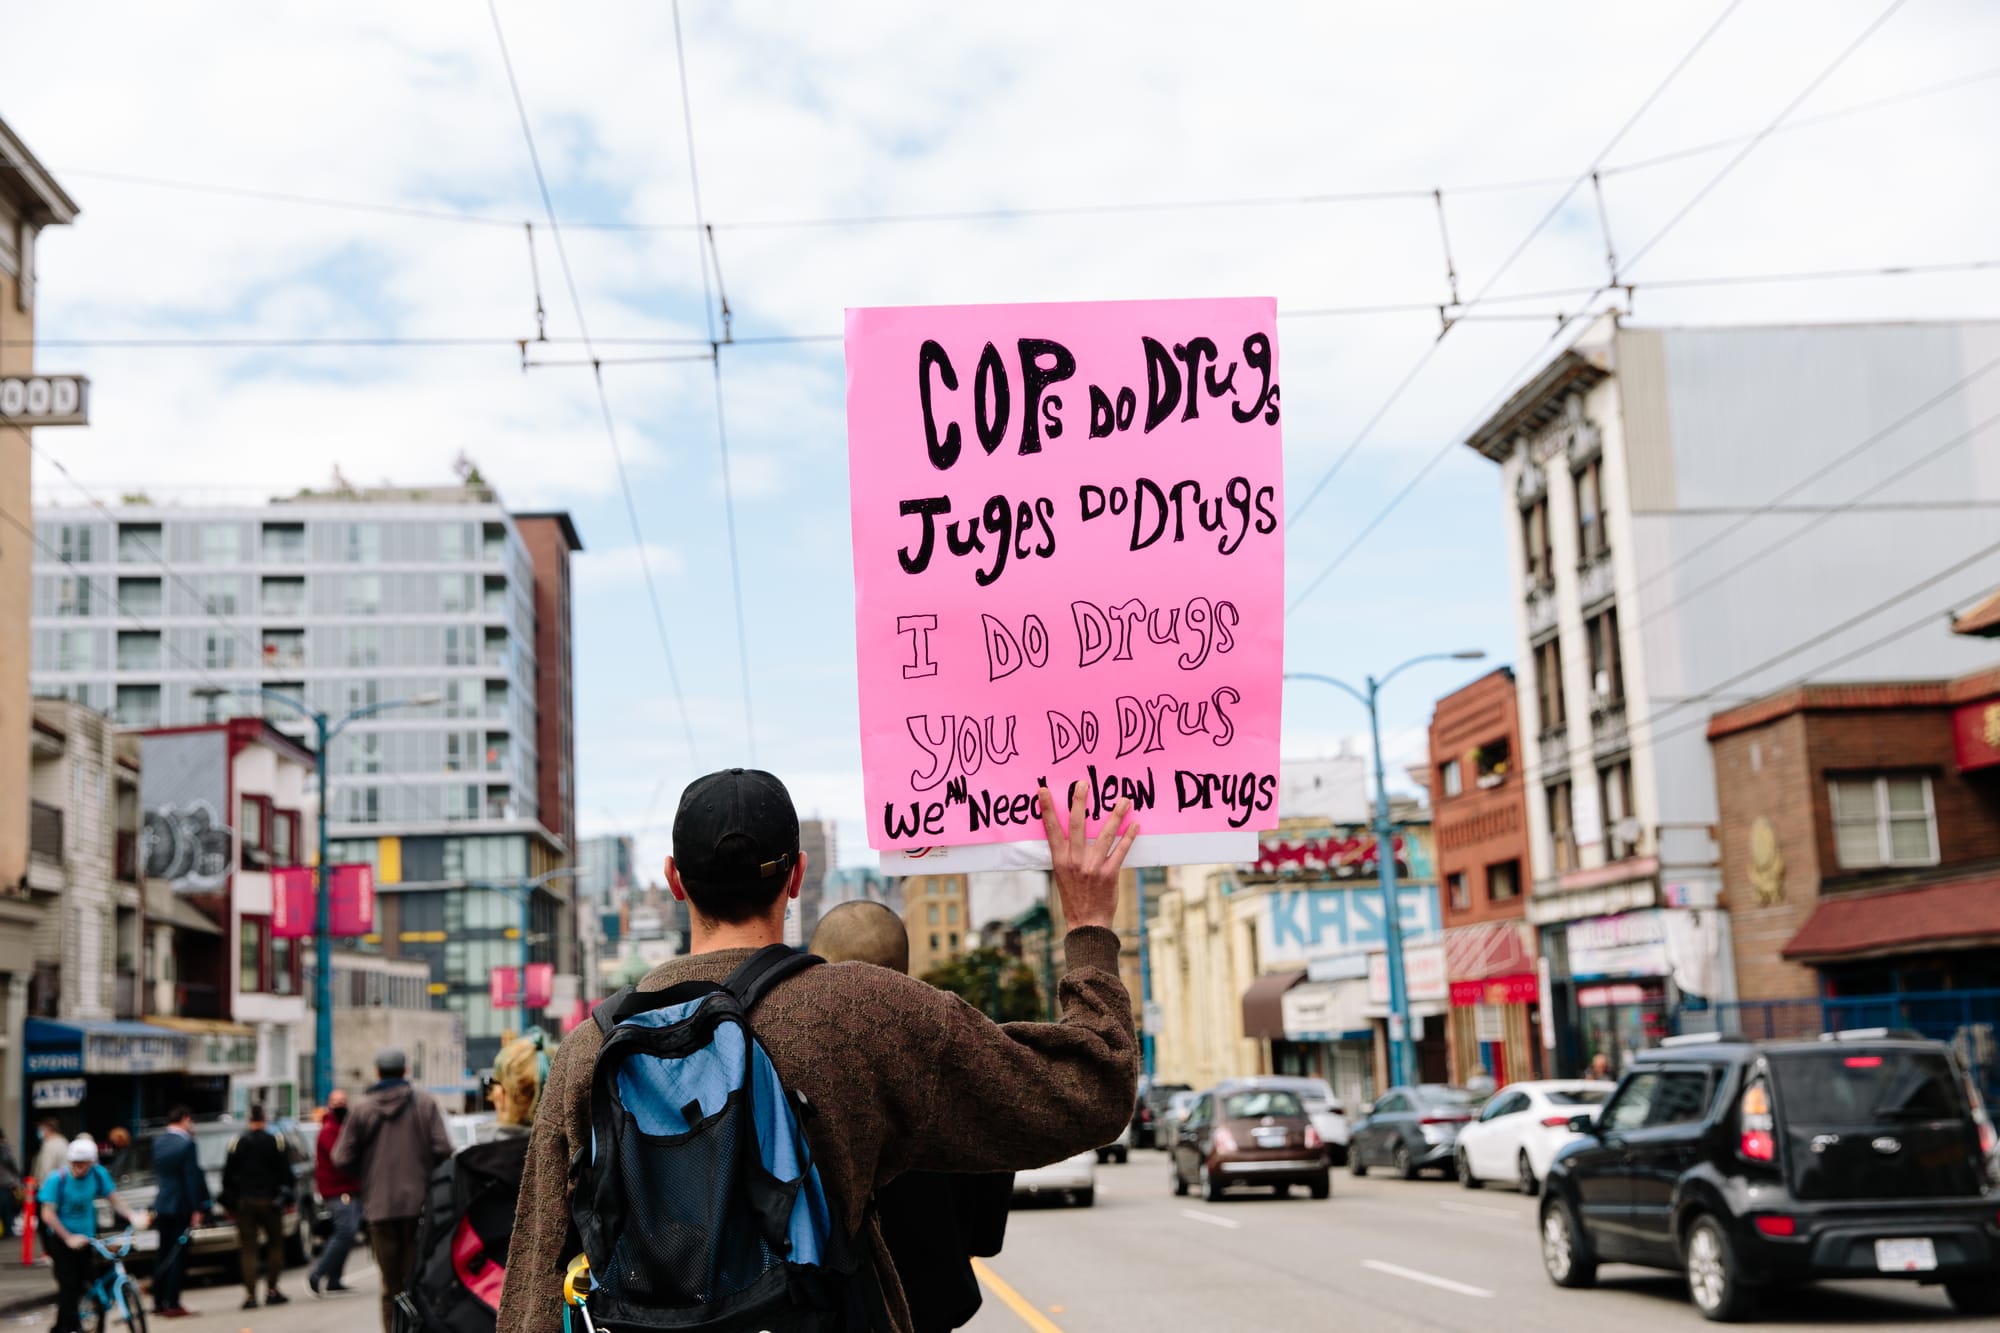 Rear view of a person in a brown sweater and blue backpack holding up a pink sign that reads "Cops do drugs. Judges do drugs. I do drugs. You do drugs. We need new drugs." Down what appears to be Hastings Street in Vancouver.